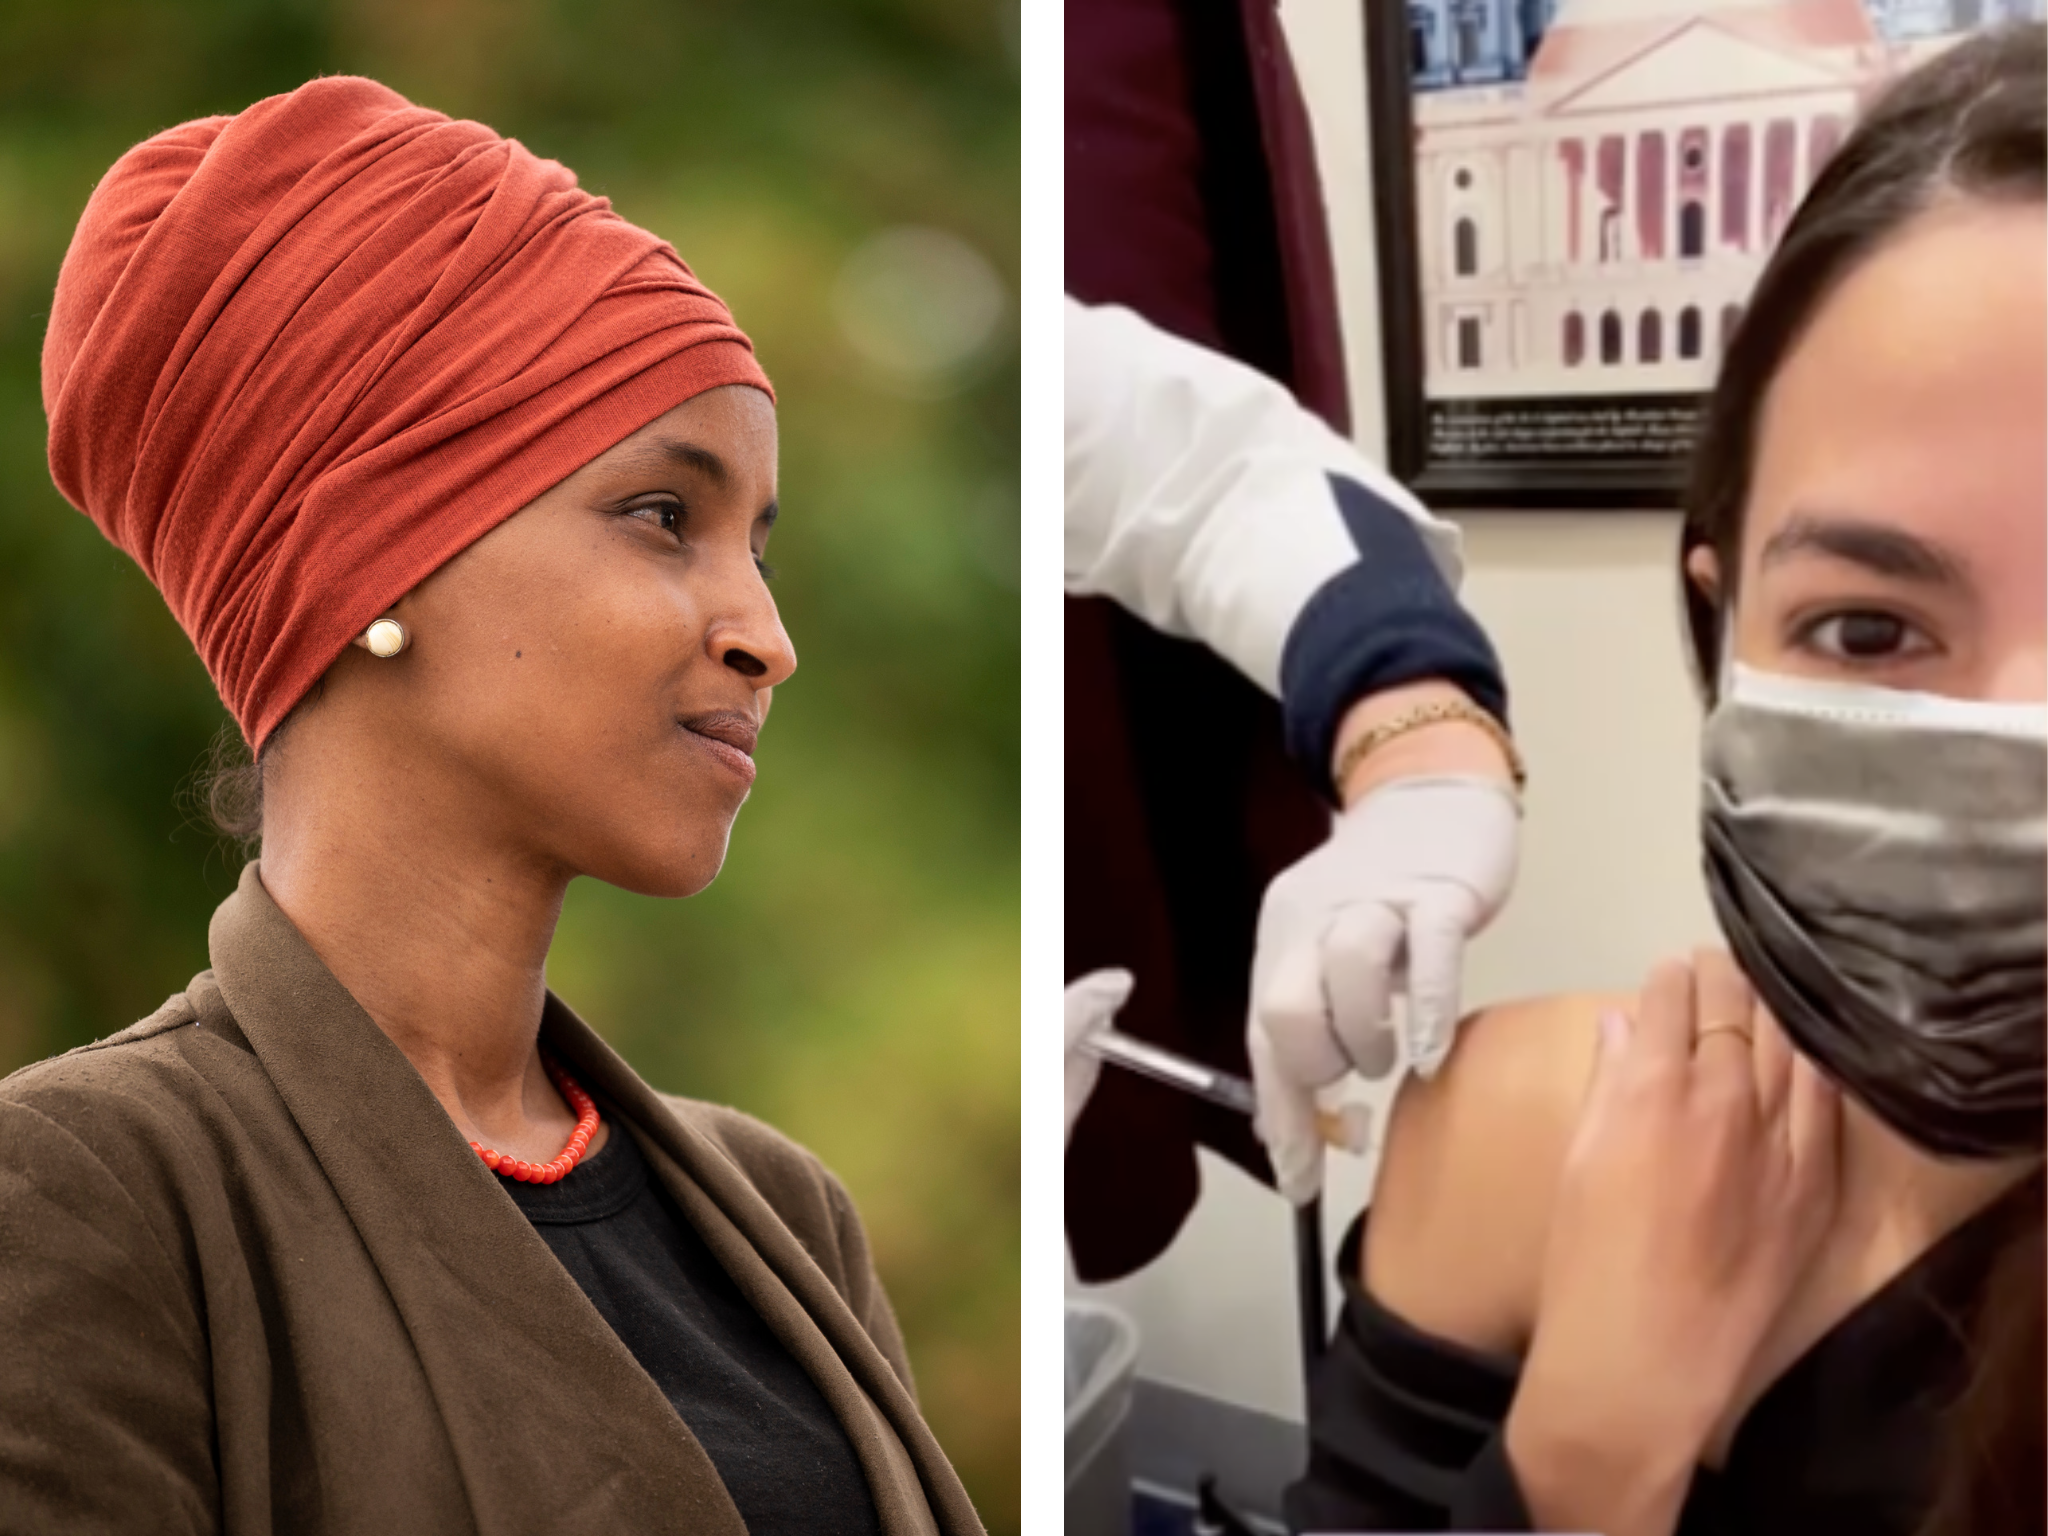 llhan Omar has criticized lawmakers like AOC, who received the vaccine ahead of other Americans